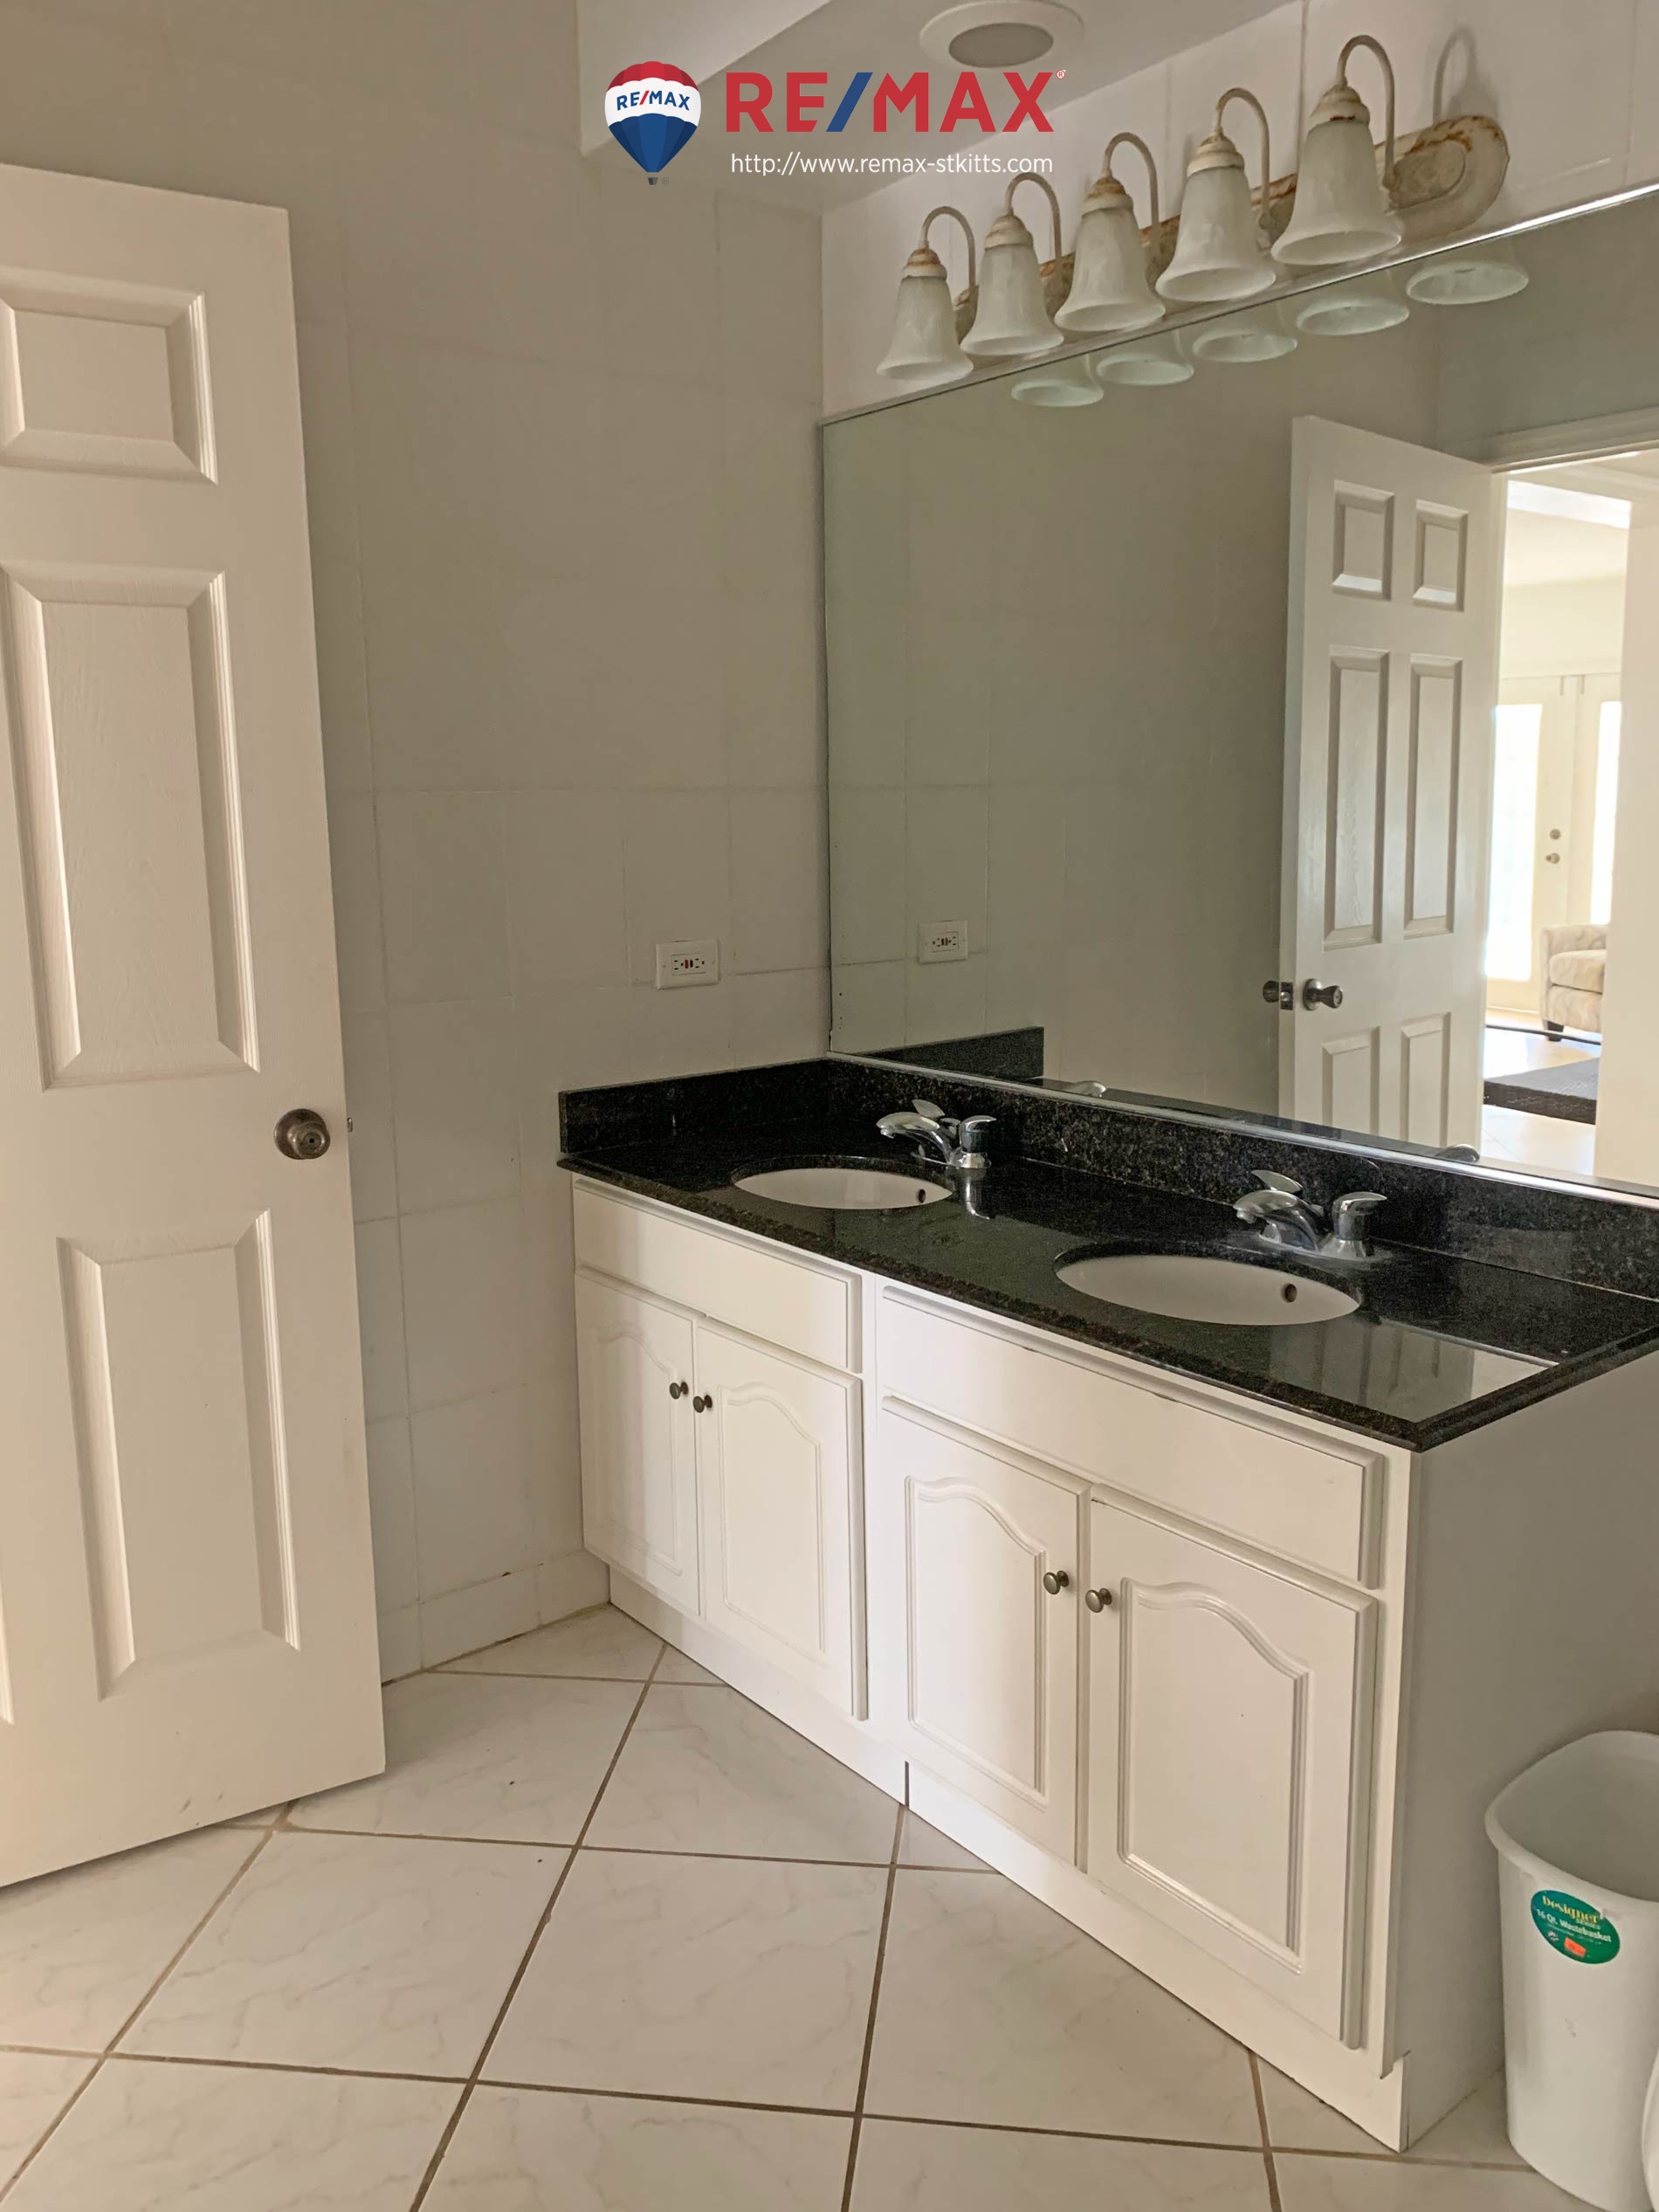 Bathroom of 2 bedroom citizenship approved condo for sale st. kitts